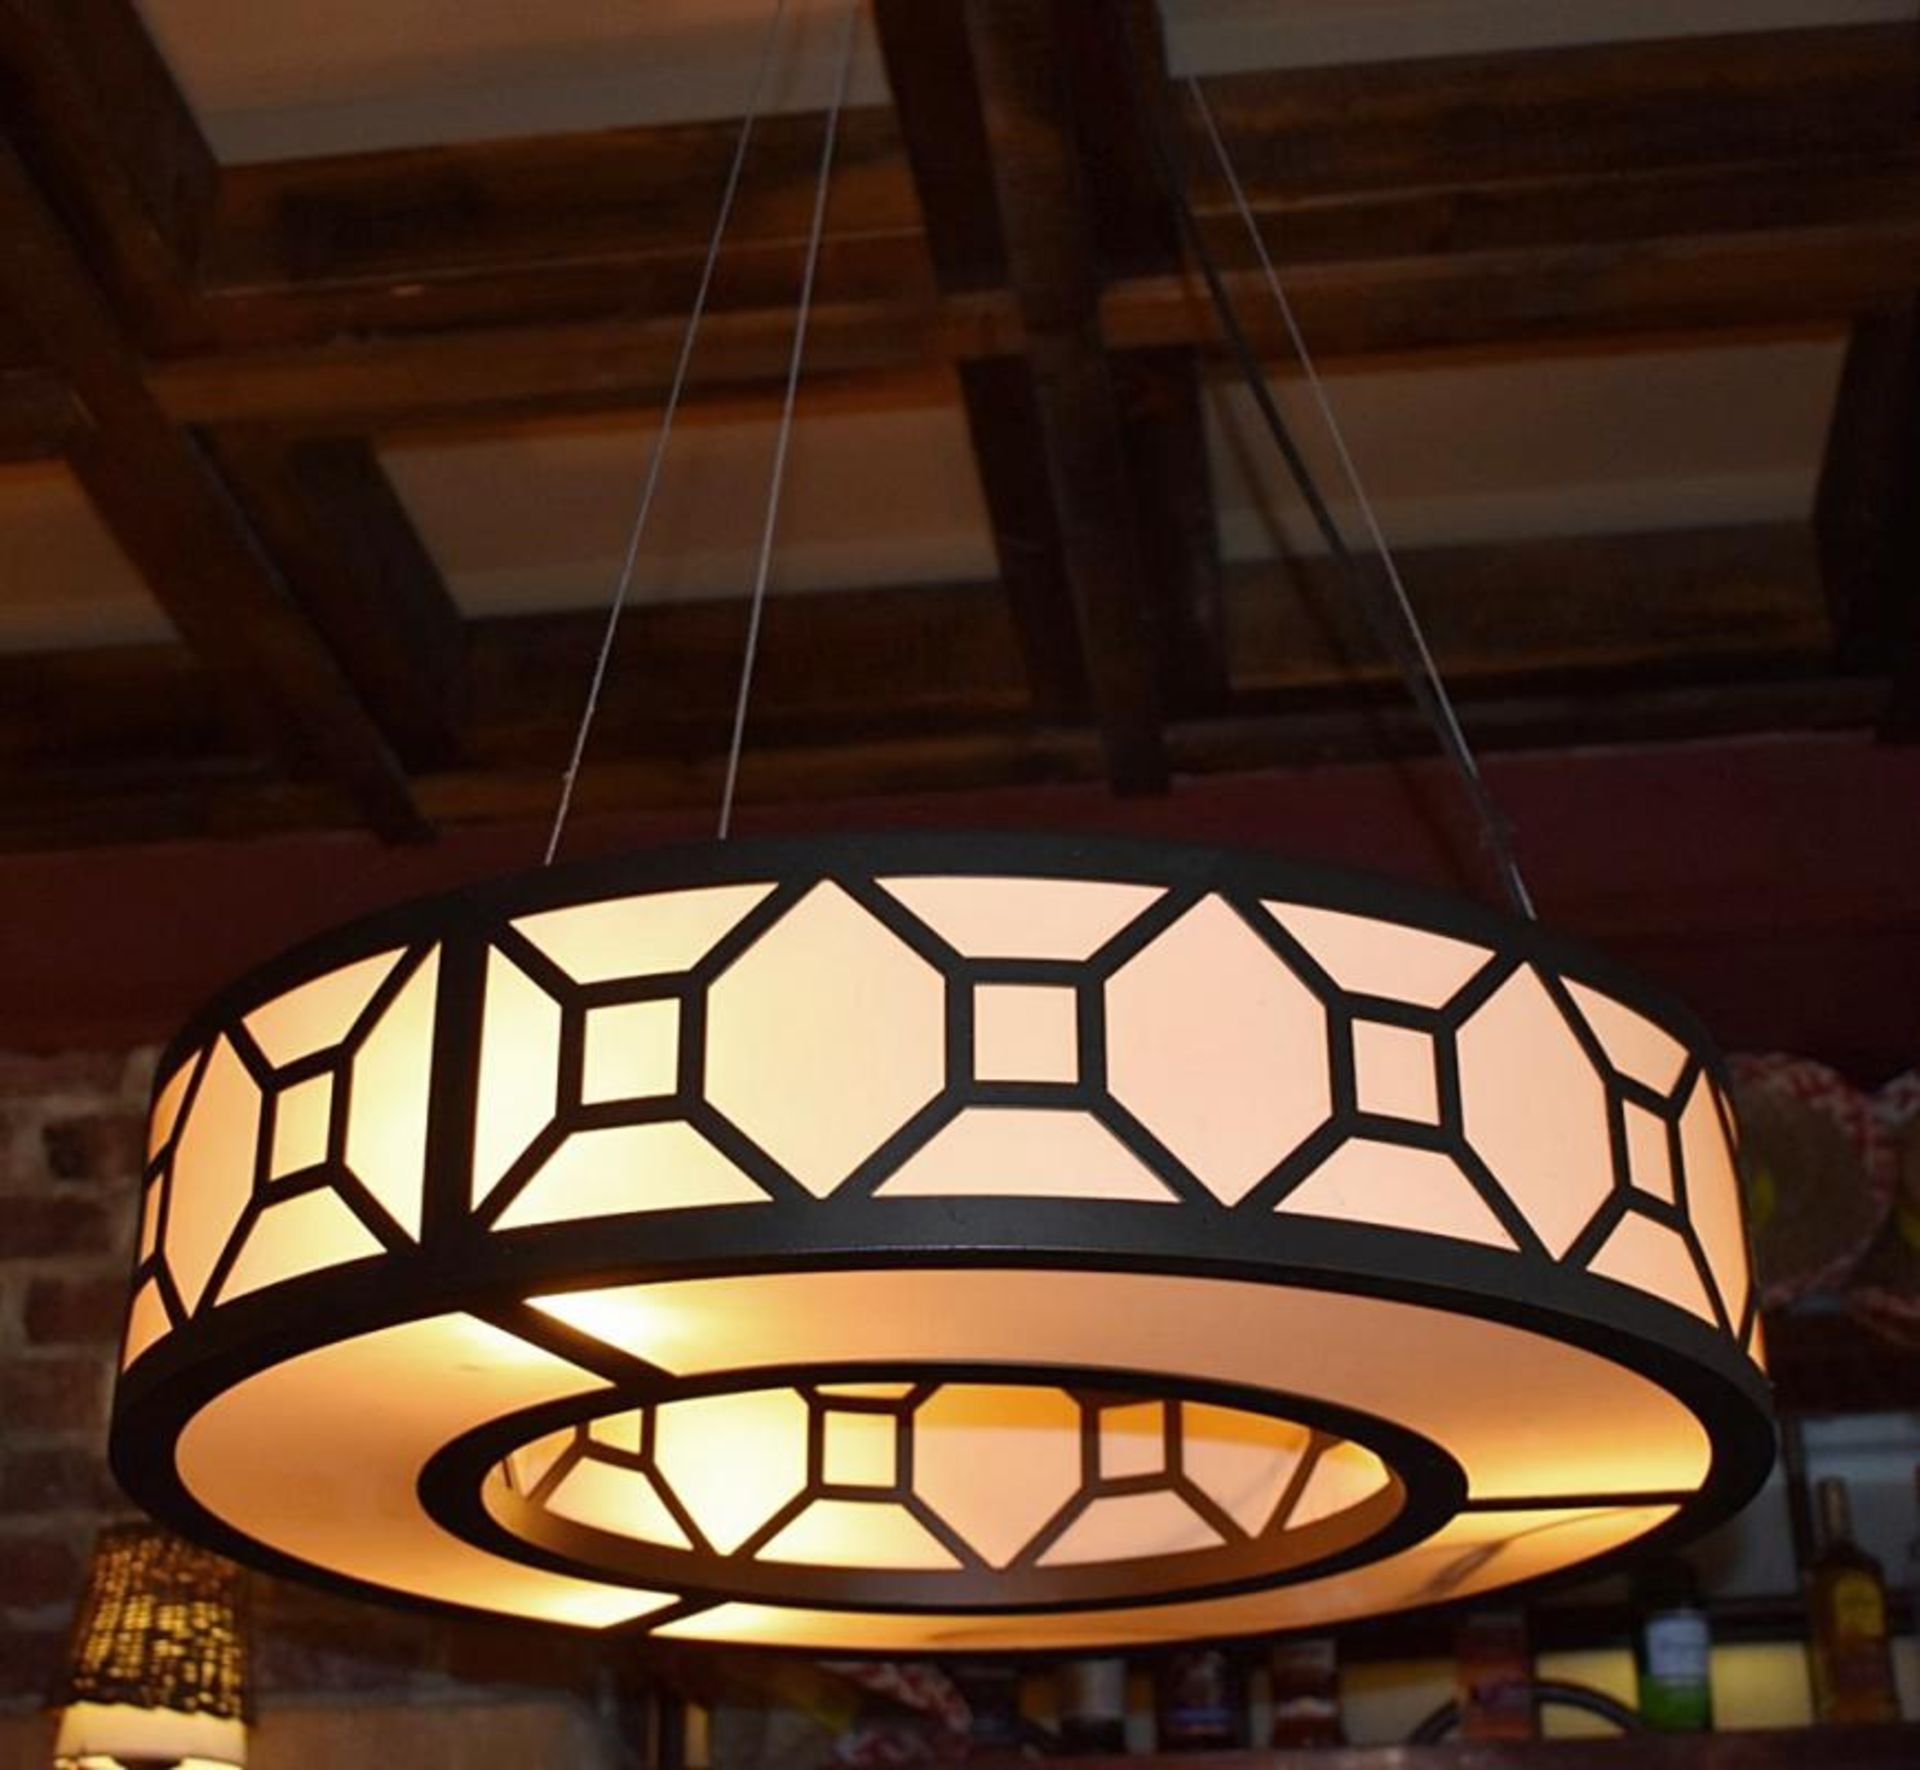 1 x Large Round Suspended Commercial Ceiling Light Fitting Featuring A Leaded Glass Style Shade - - Image 6 of 6